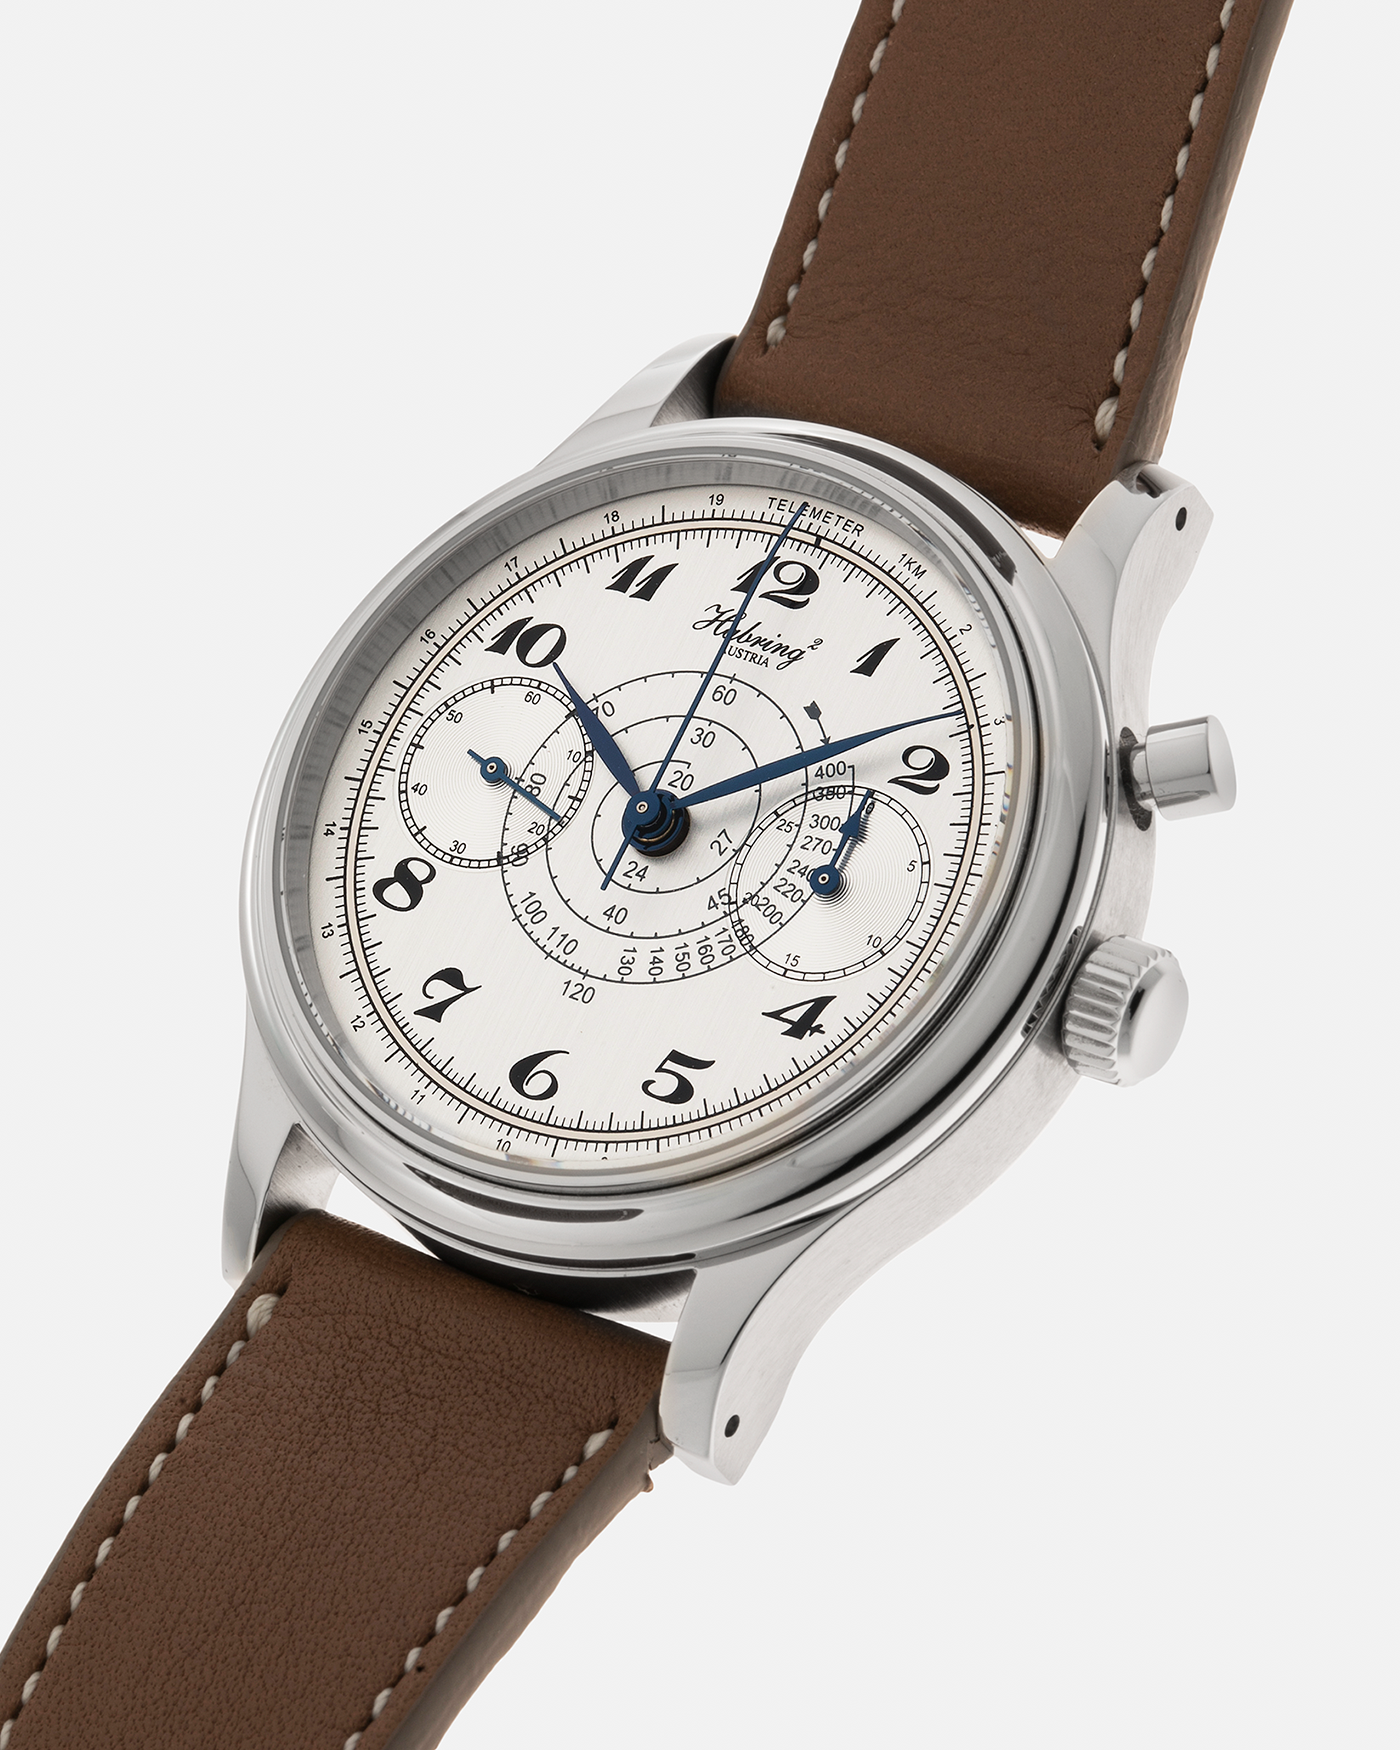 Brand: Habring² Model: Monopusher ‘Custom Dial’ Year: 2020’s Material: Stainless Steel  Movement: Habring² Cal. A11C-H1, Manual-Winding Case Diameter: 38.5mm Lug Width: 20mm Strap: Nostime Tanned Calf Leather Strap, additional Habring² Tanned Calf Leather Strap, and Milanese Stainless Steel Bracelet